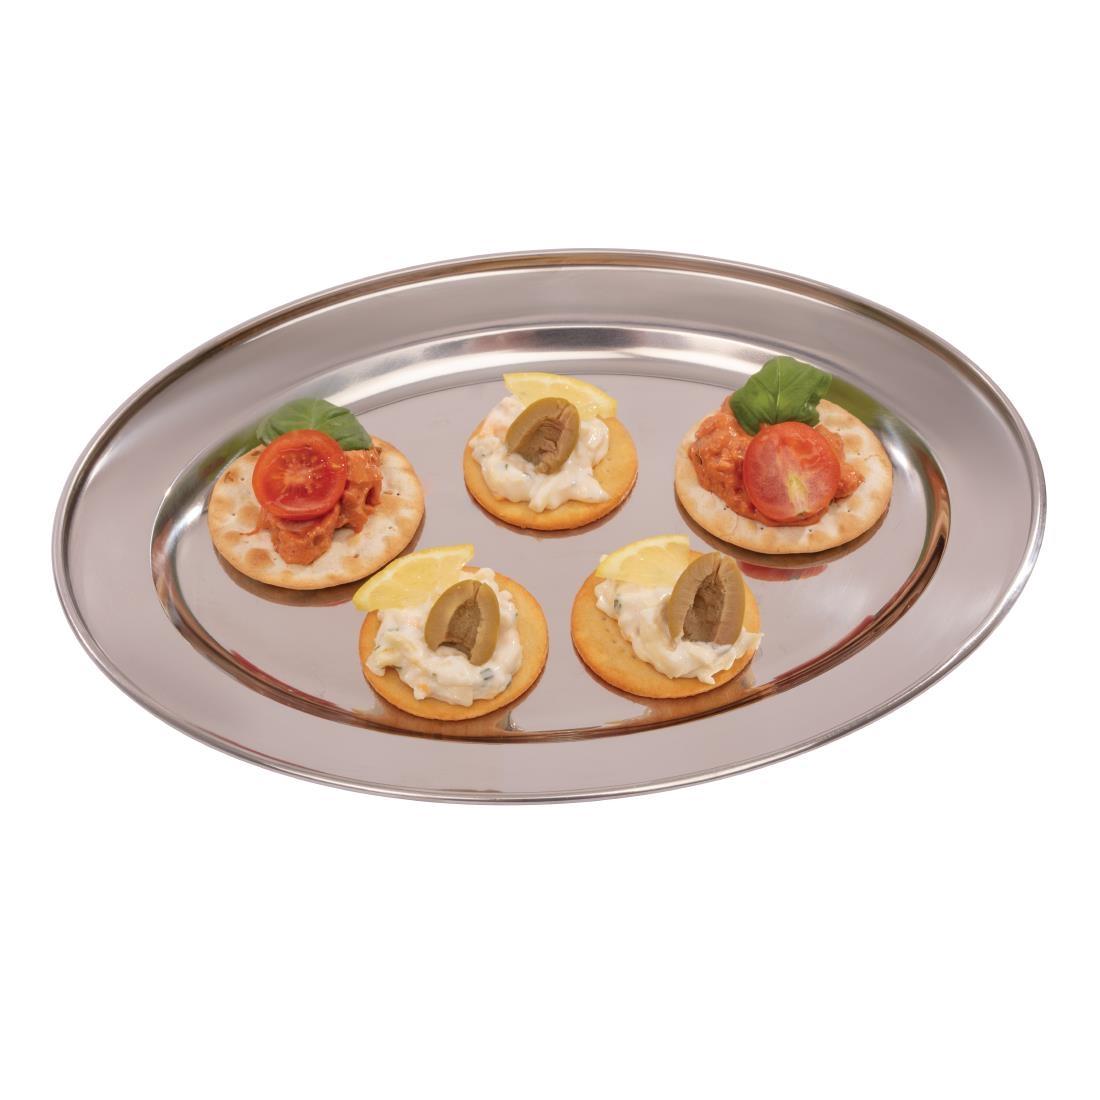 Olympia Stainless Steel Oval Serving Tray 300mm - K363  - 3